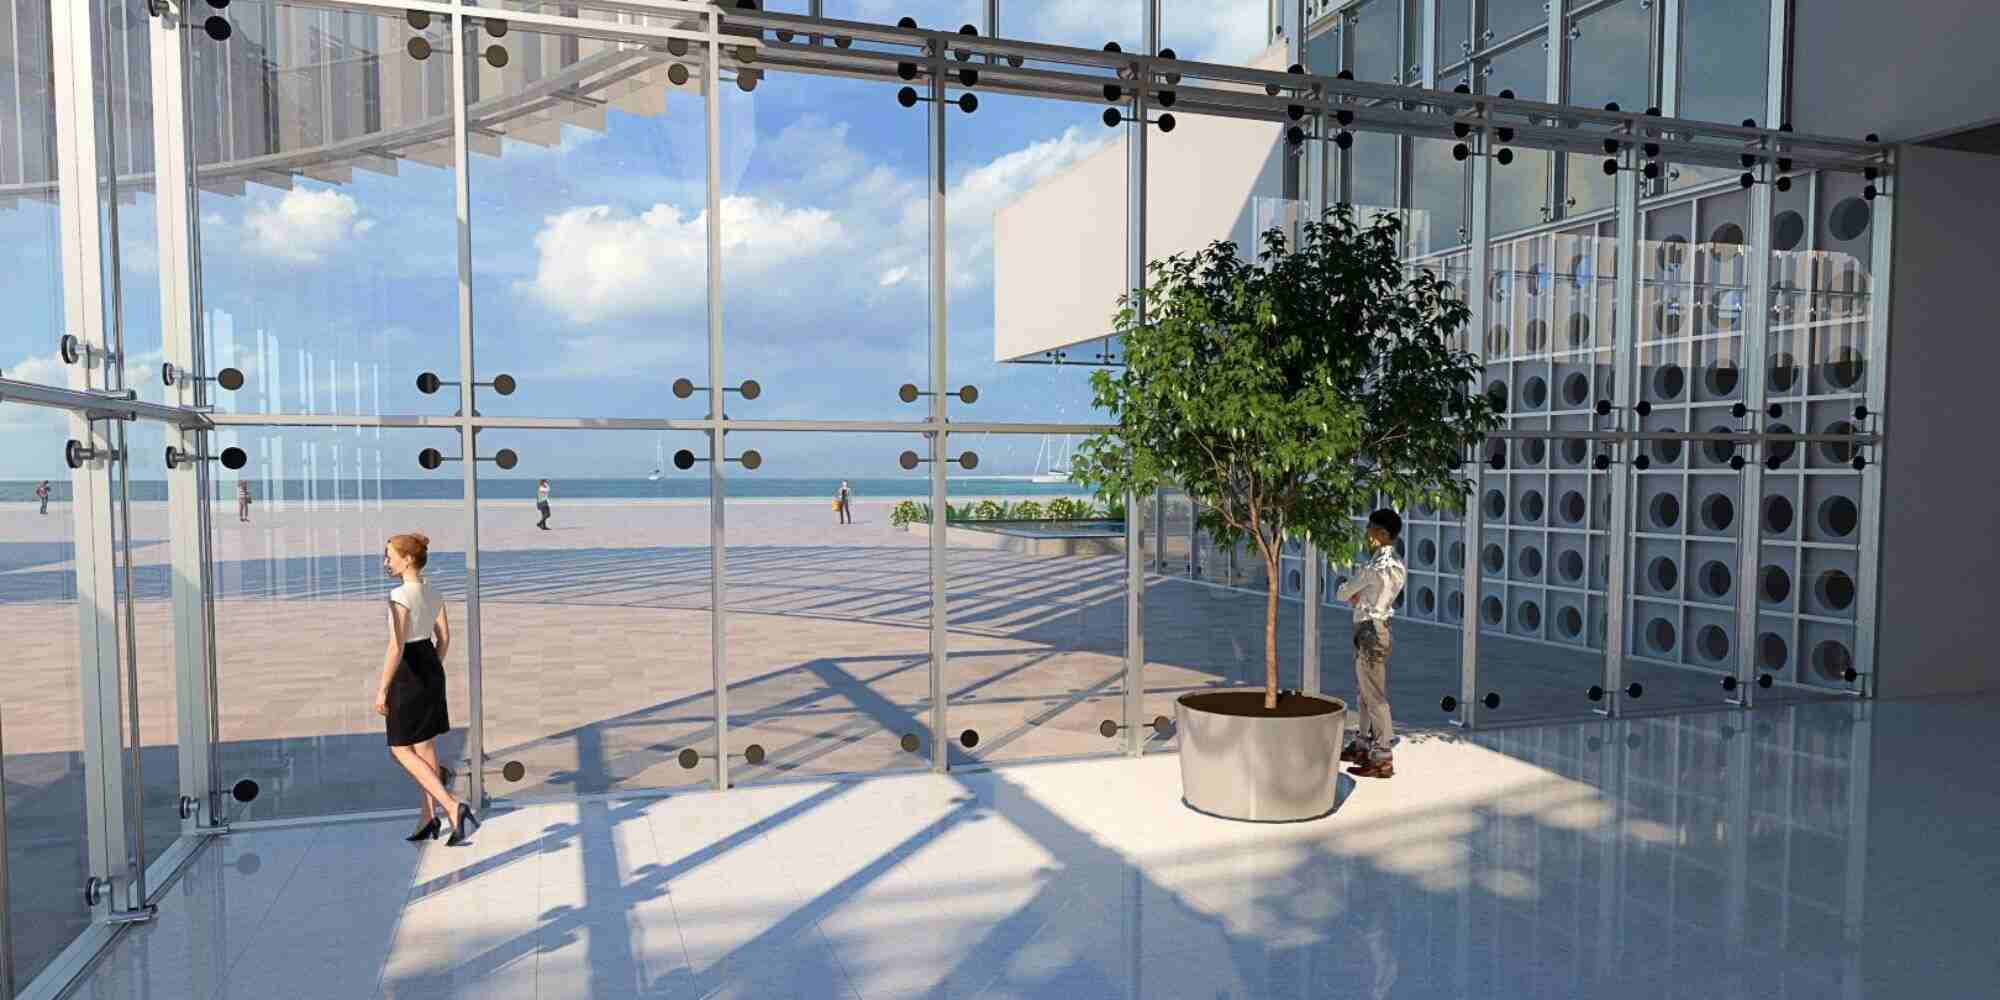 3d interior rendering of an office building hallway with sea view through glass façade